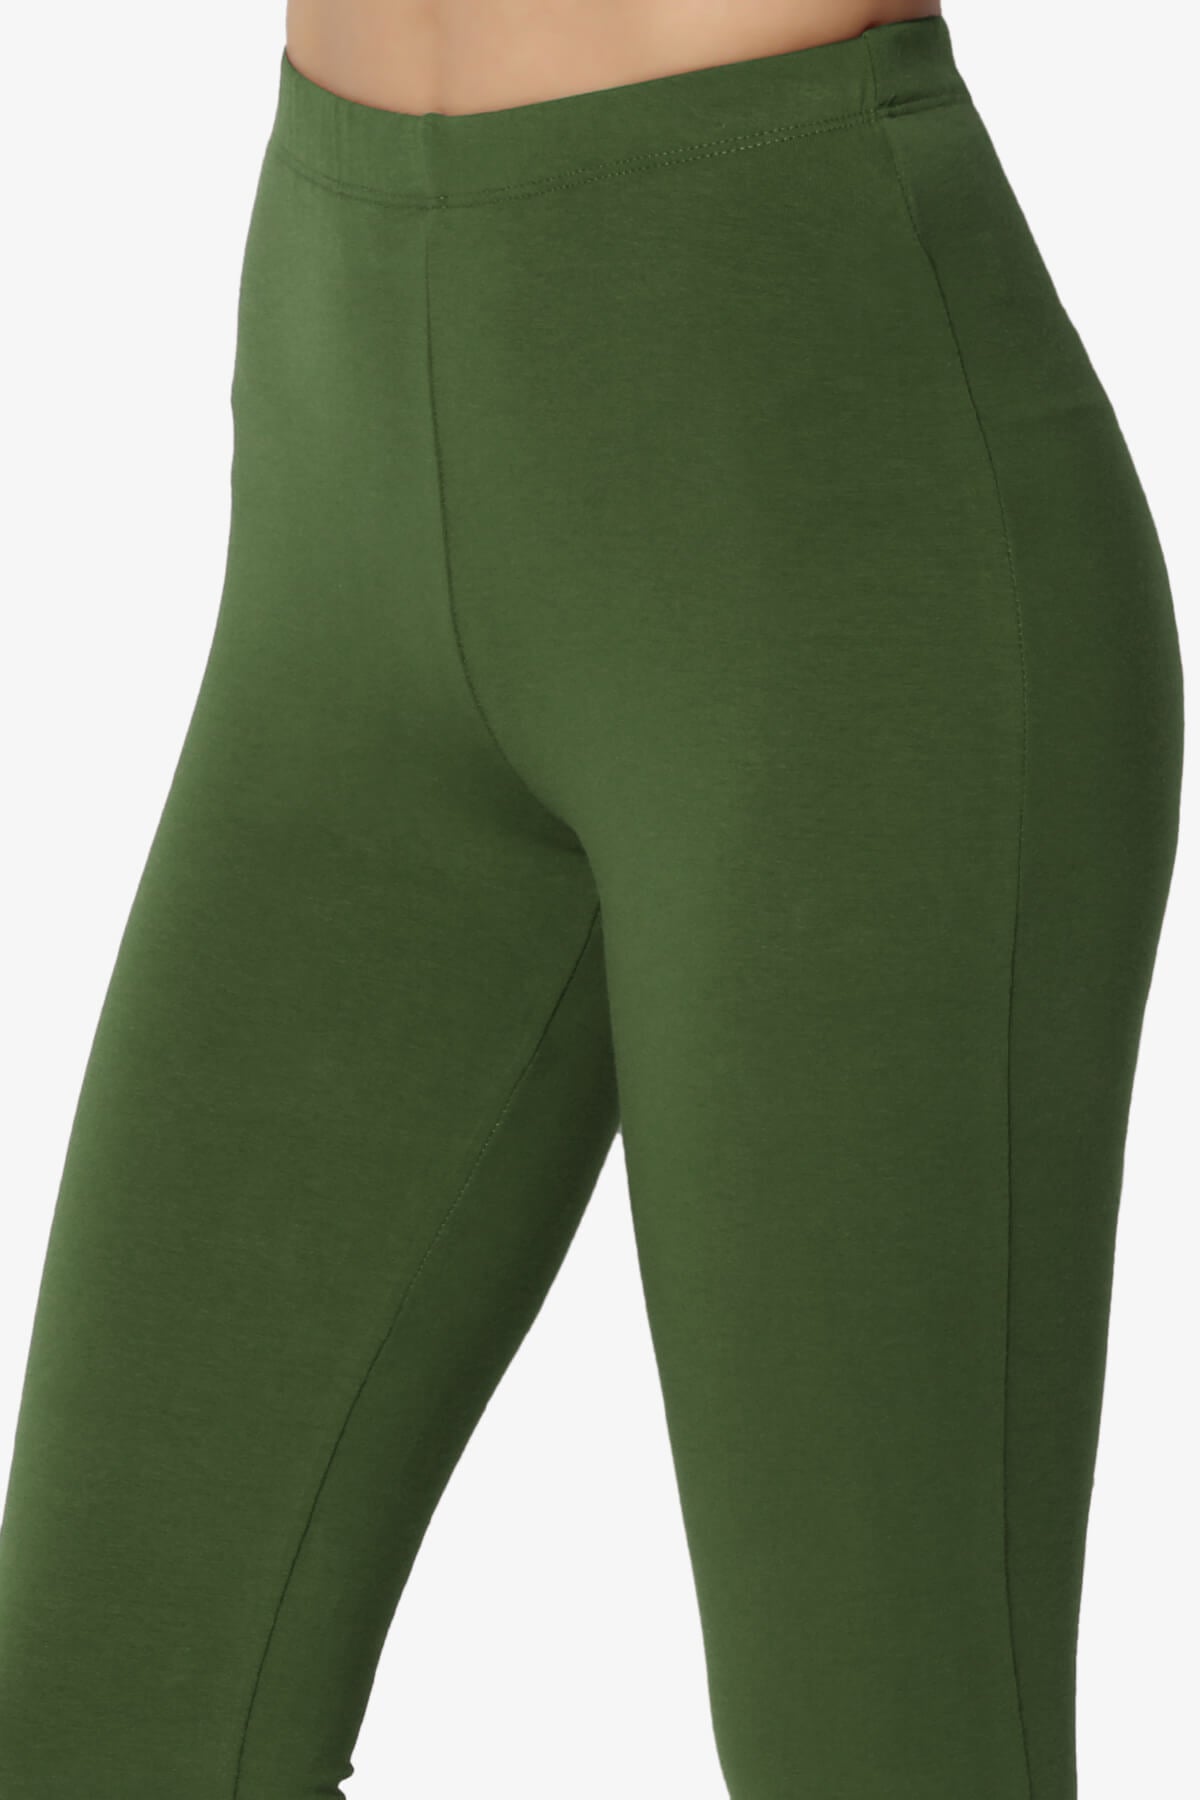 Load image into Gallery viewer, Ansley Luxe Cotton Capri Leggings ARMY GREEN_5
